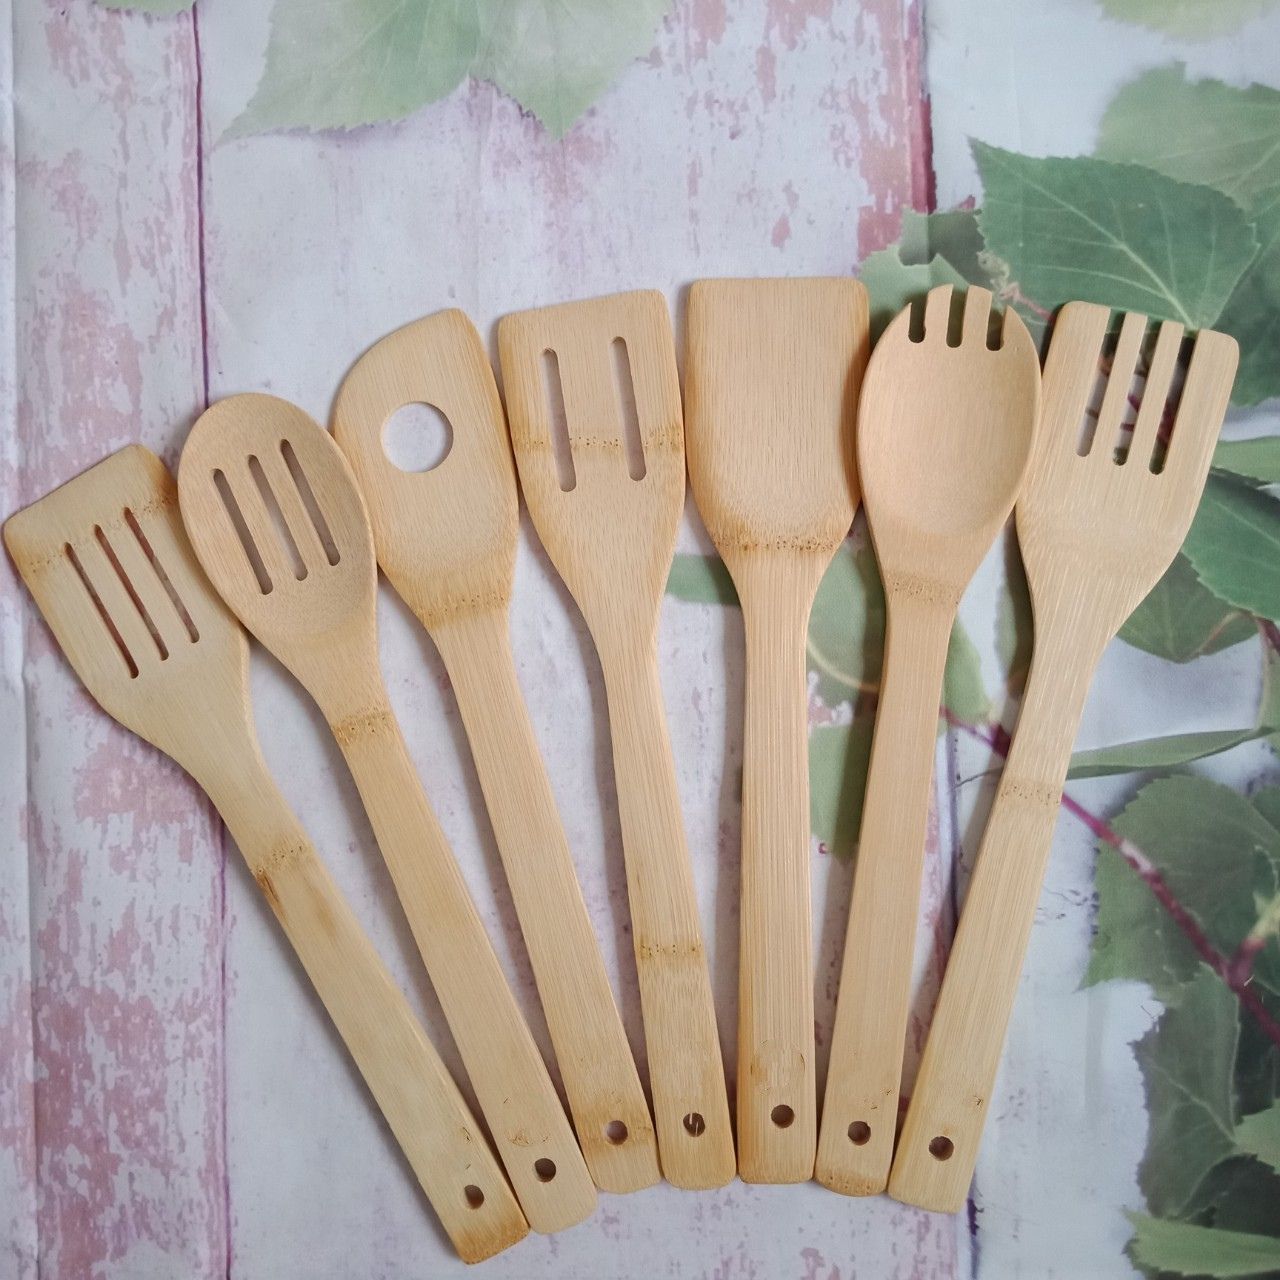 Bamboo cooking utensils 12 inch 7 piece